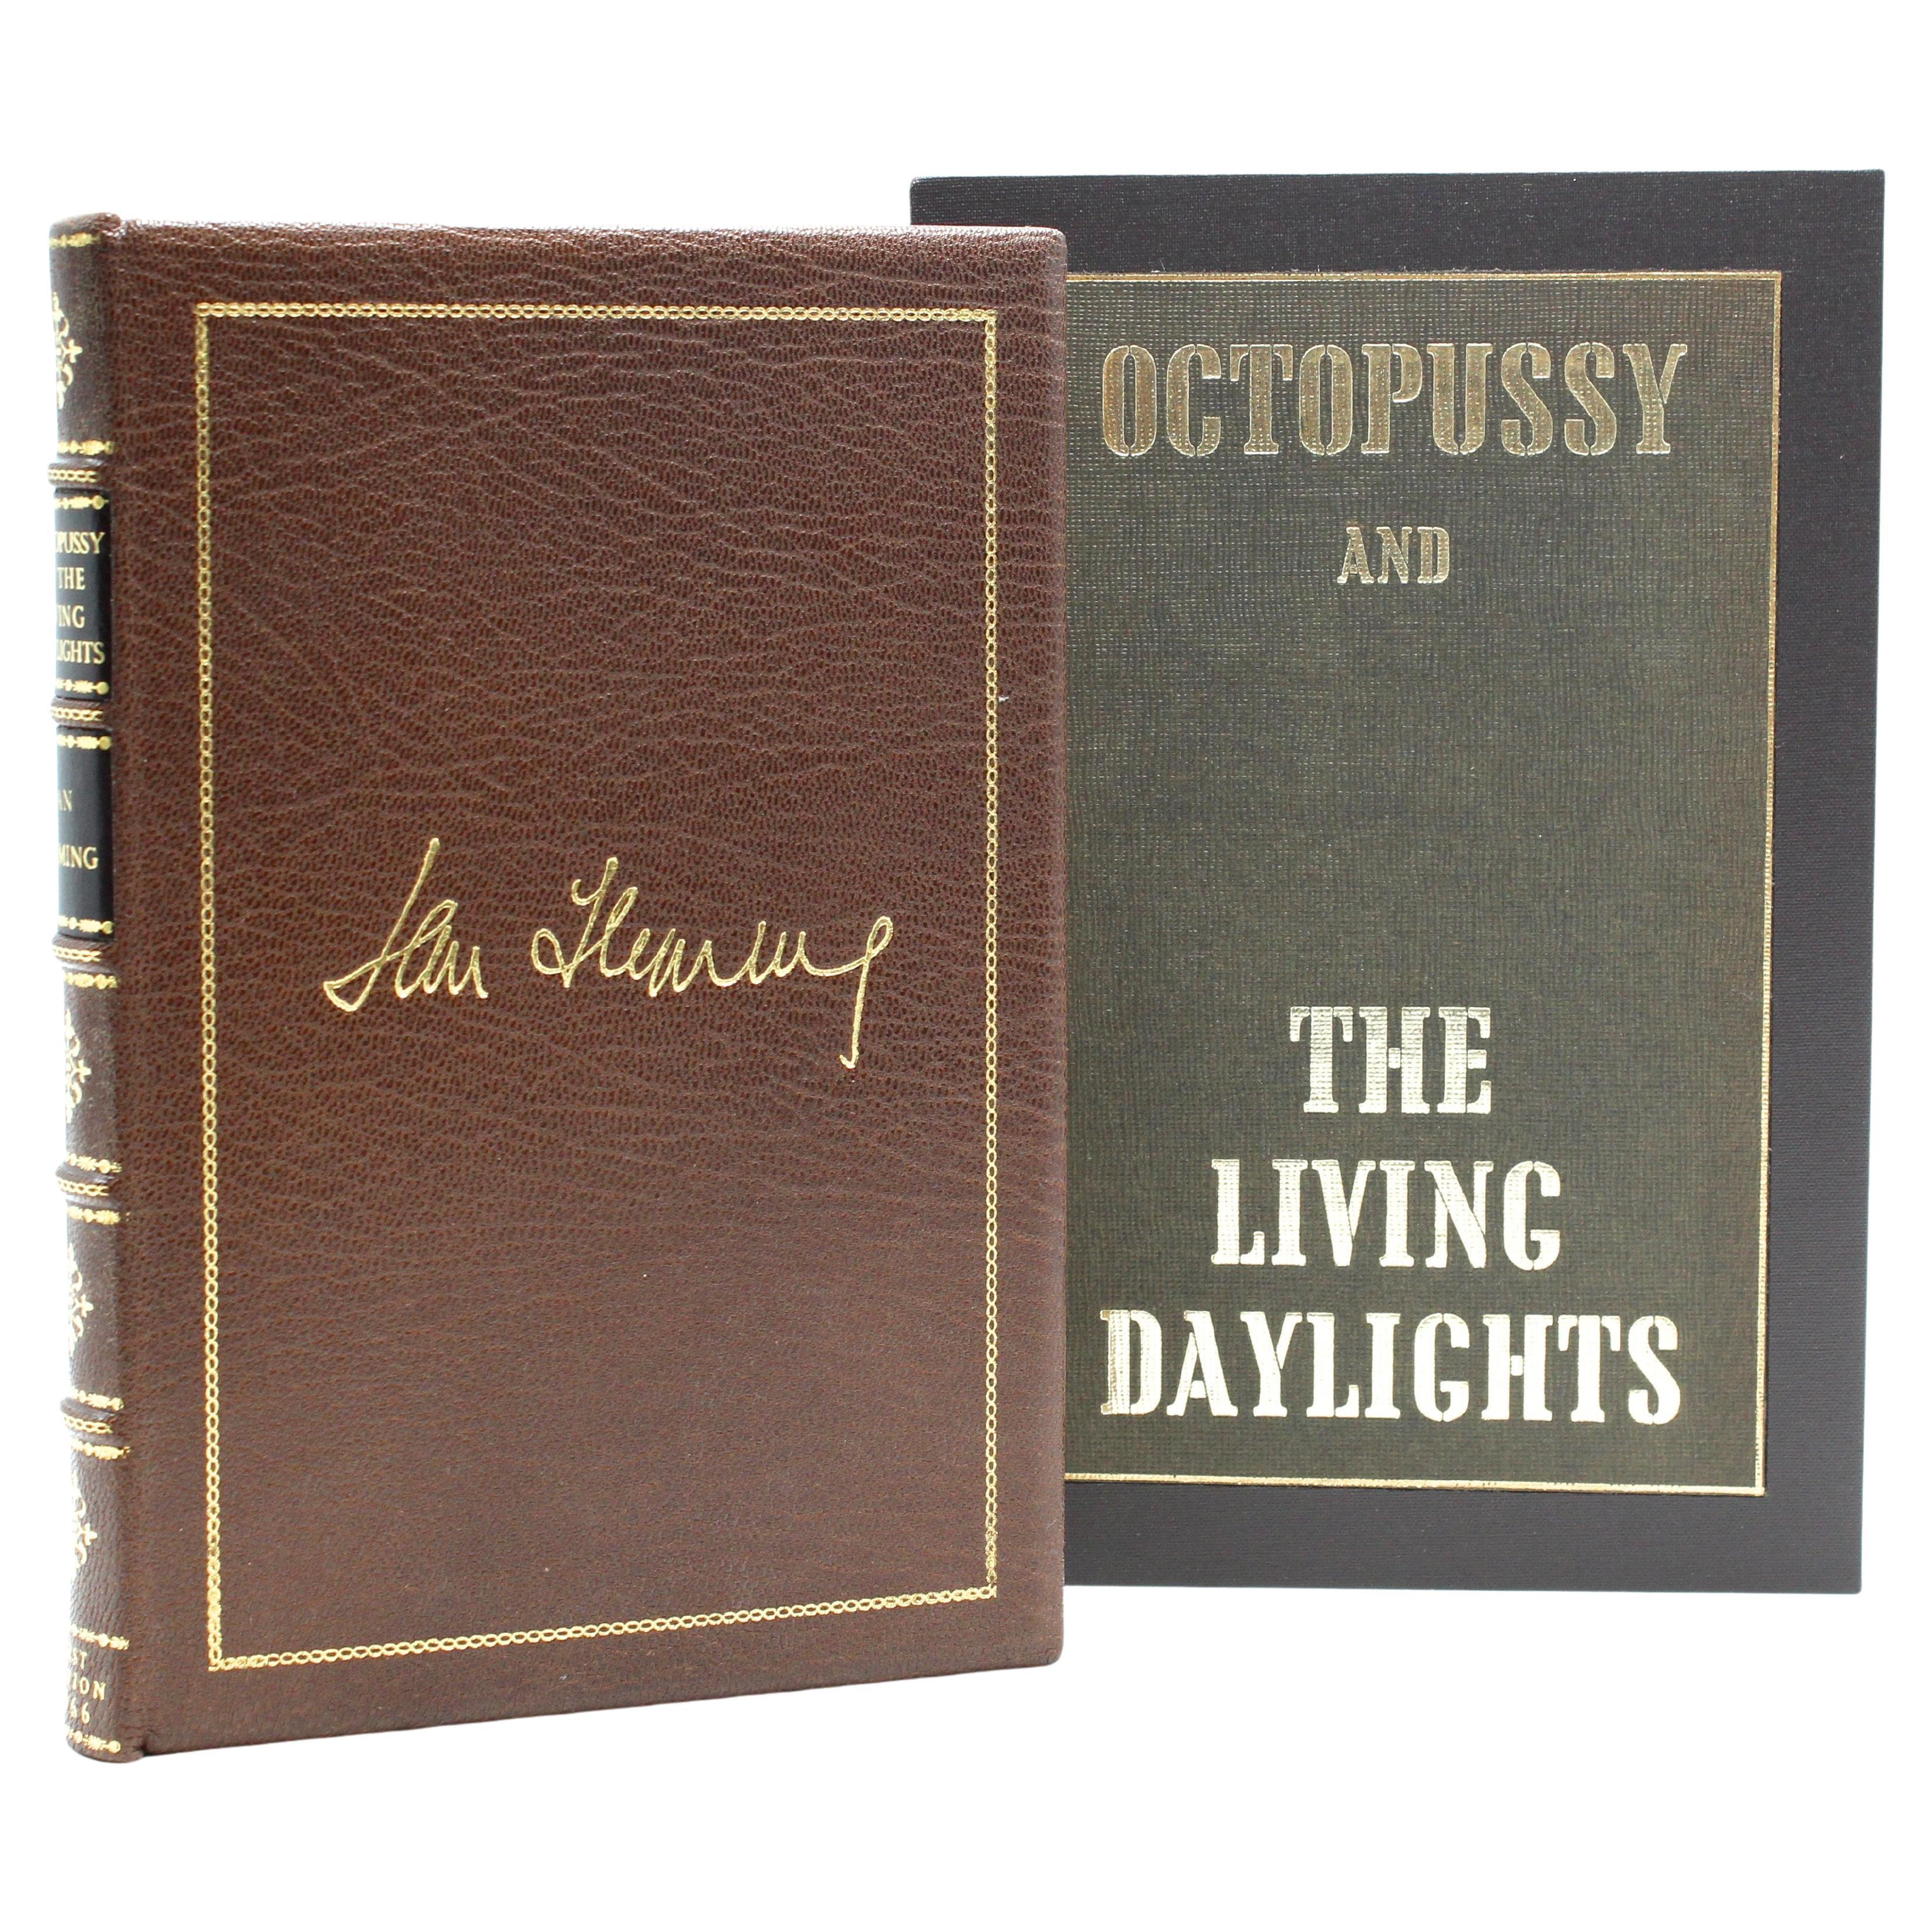 Octopussy and The Living Daylights by Ian Fleming, First UK Edition, 1966 For Sale